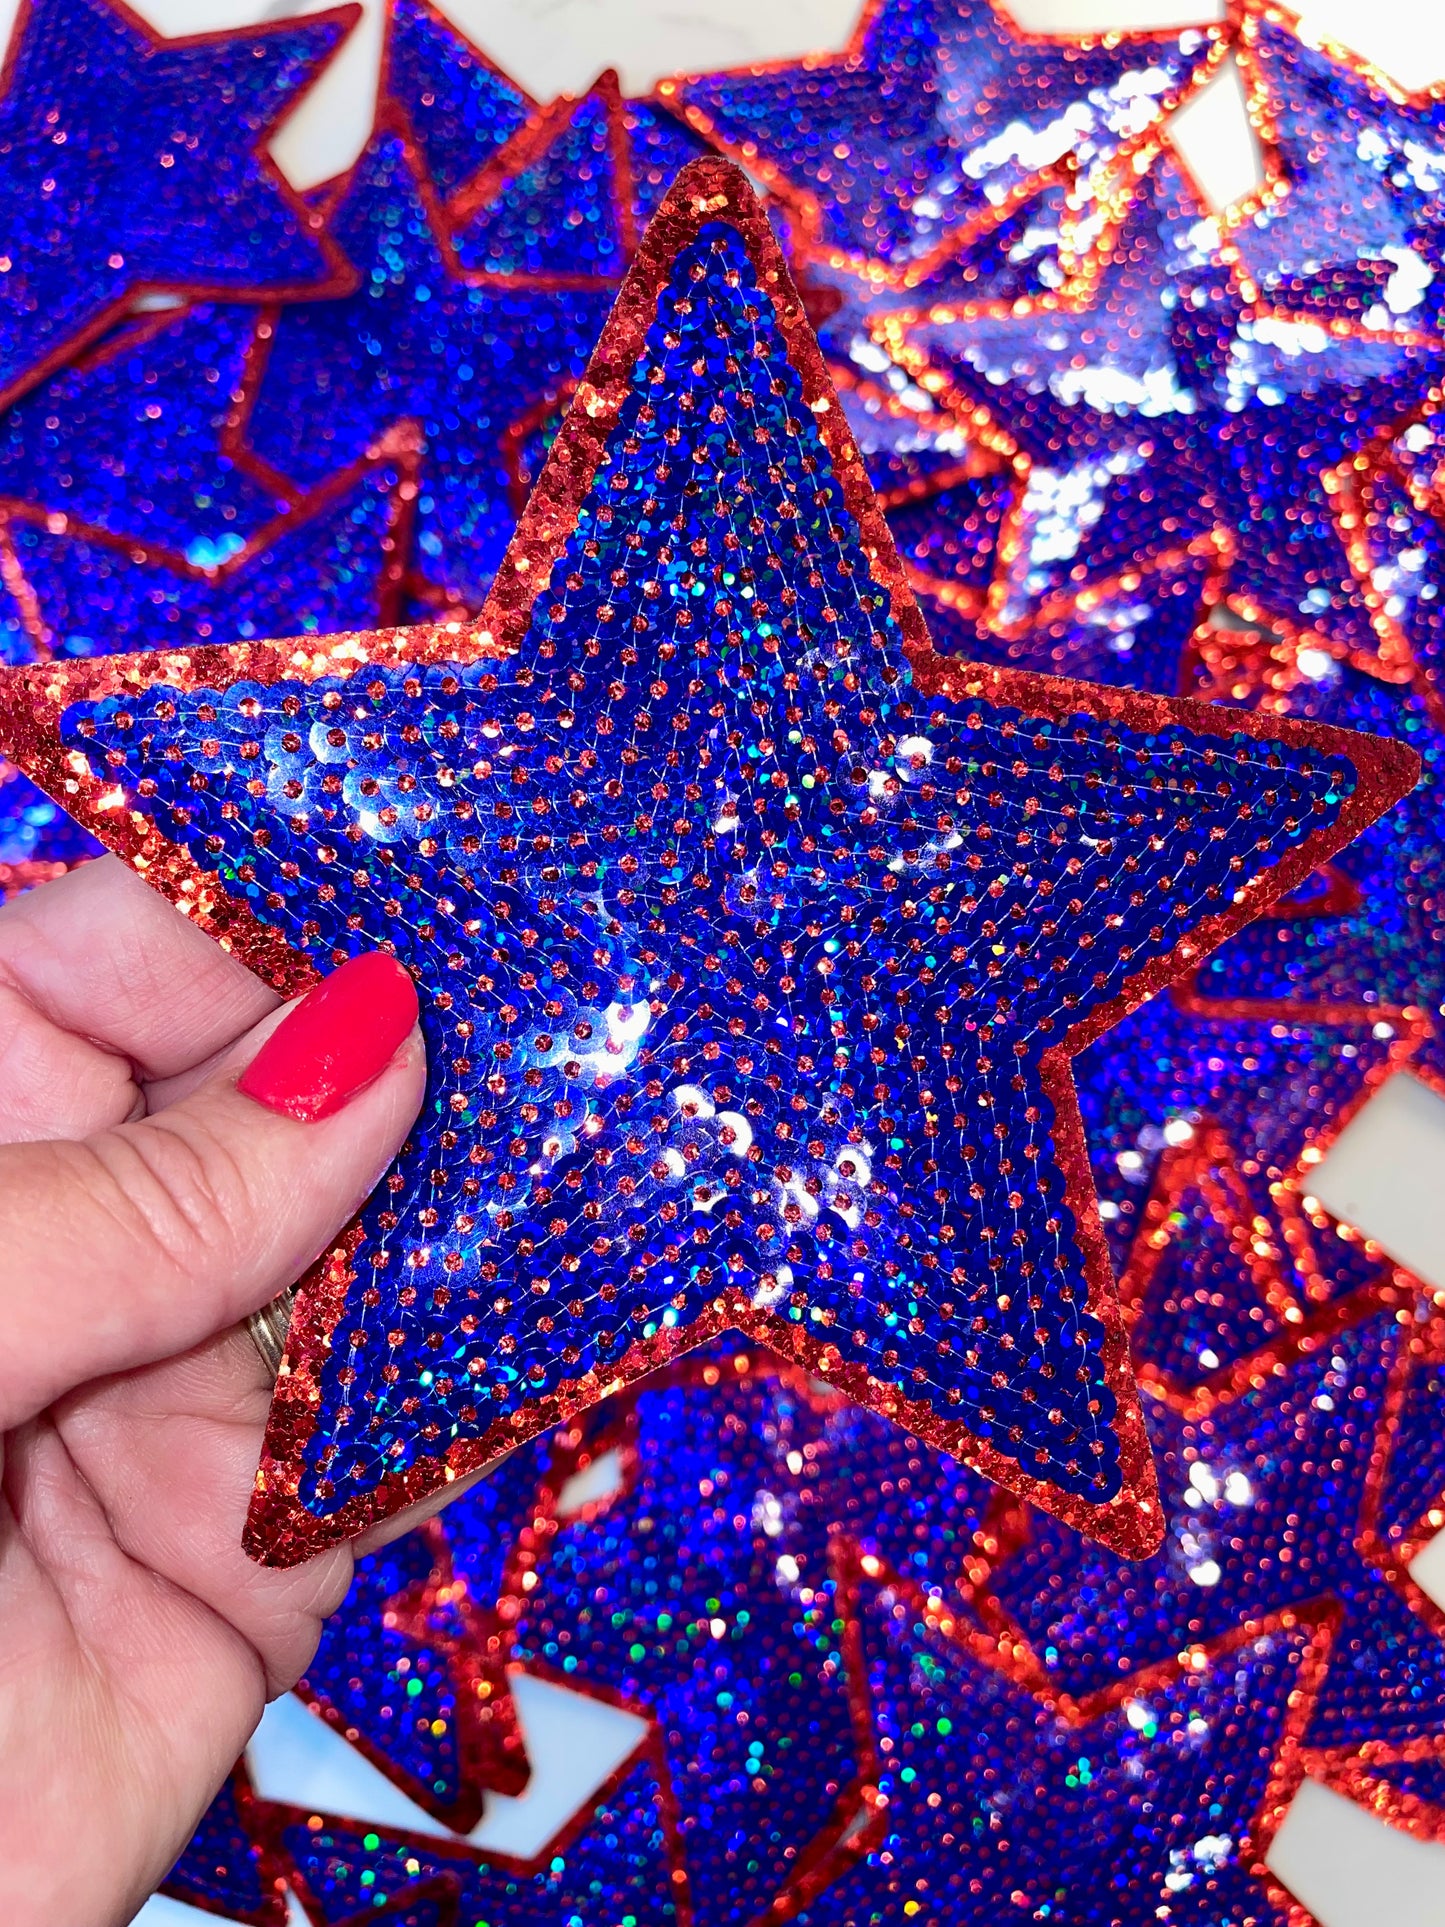 Touch Down Royal Blue Game Day Chenille Patch, Sequin Star Patch, DIY patch, Iron on Patch, Red glitter backing